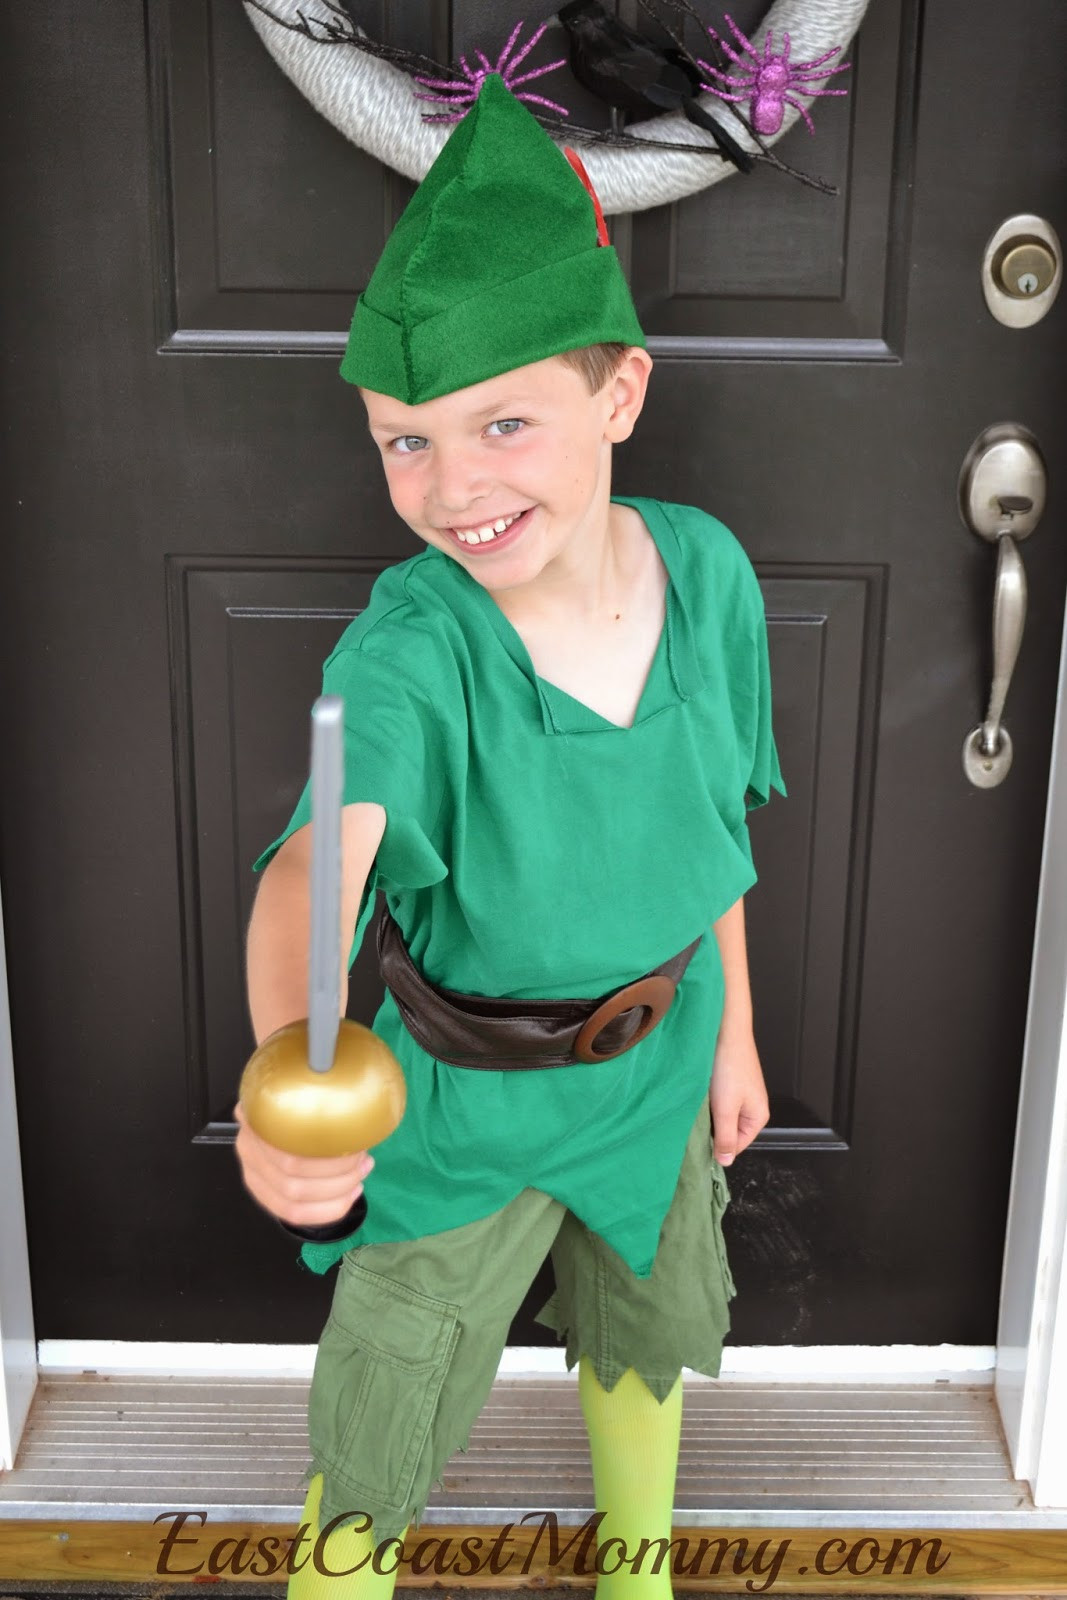 DIY Toddler Peter Pan Costume
 East Coast Mommy DIY Costumes Made from Old T Shirts